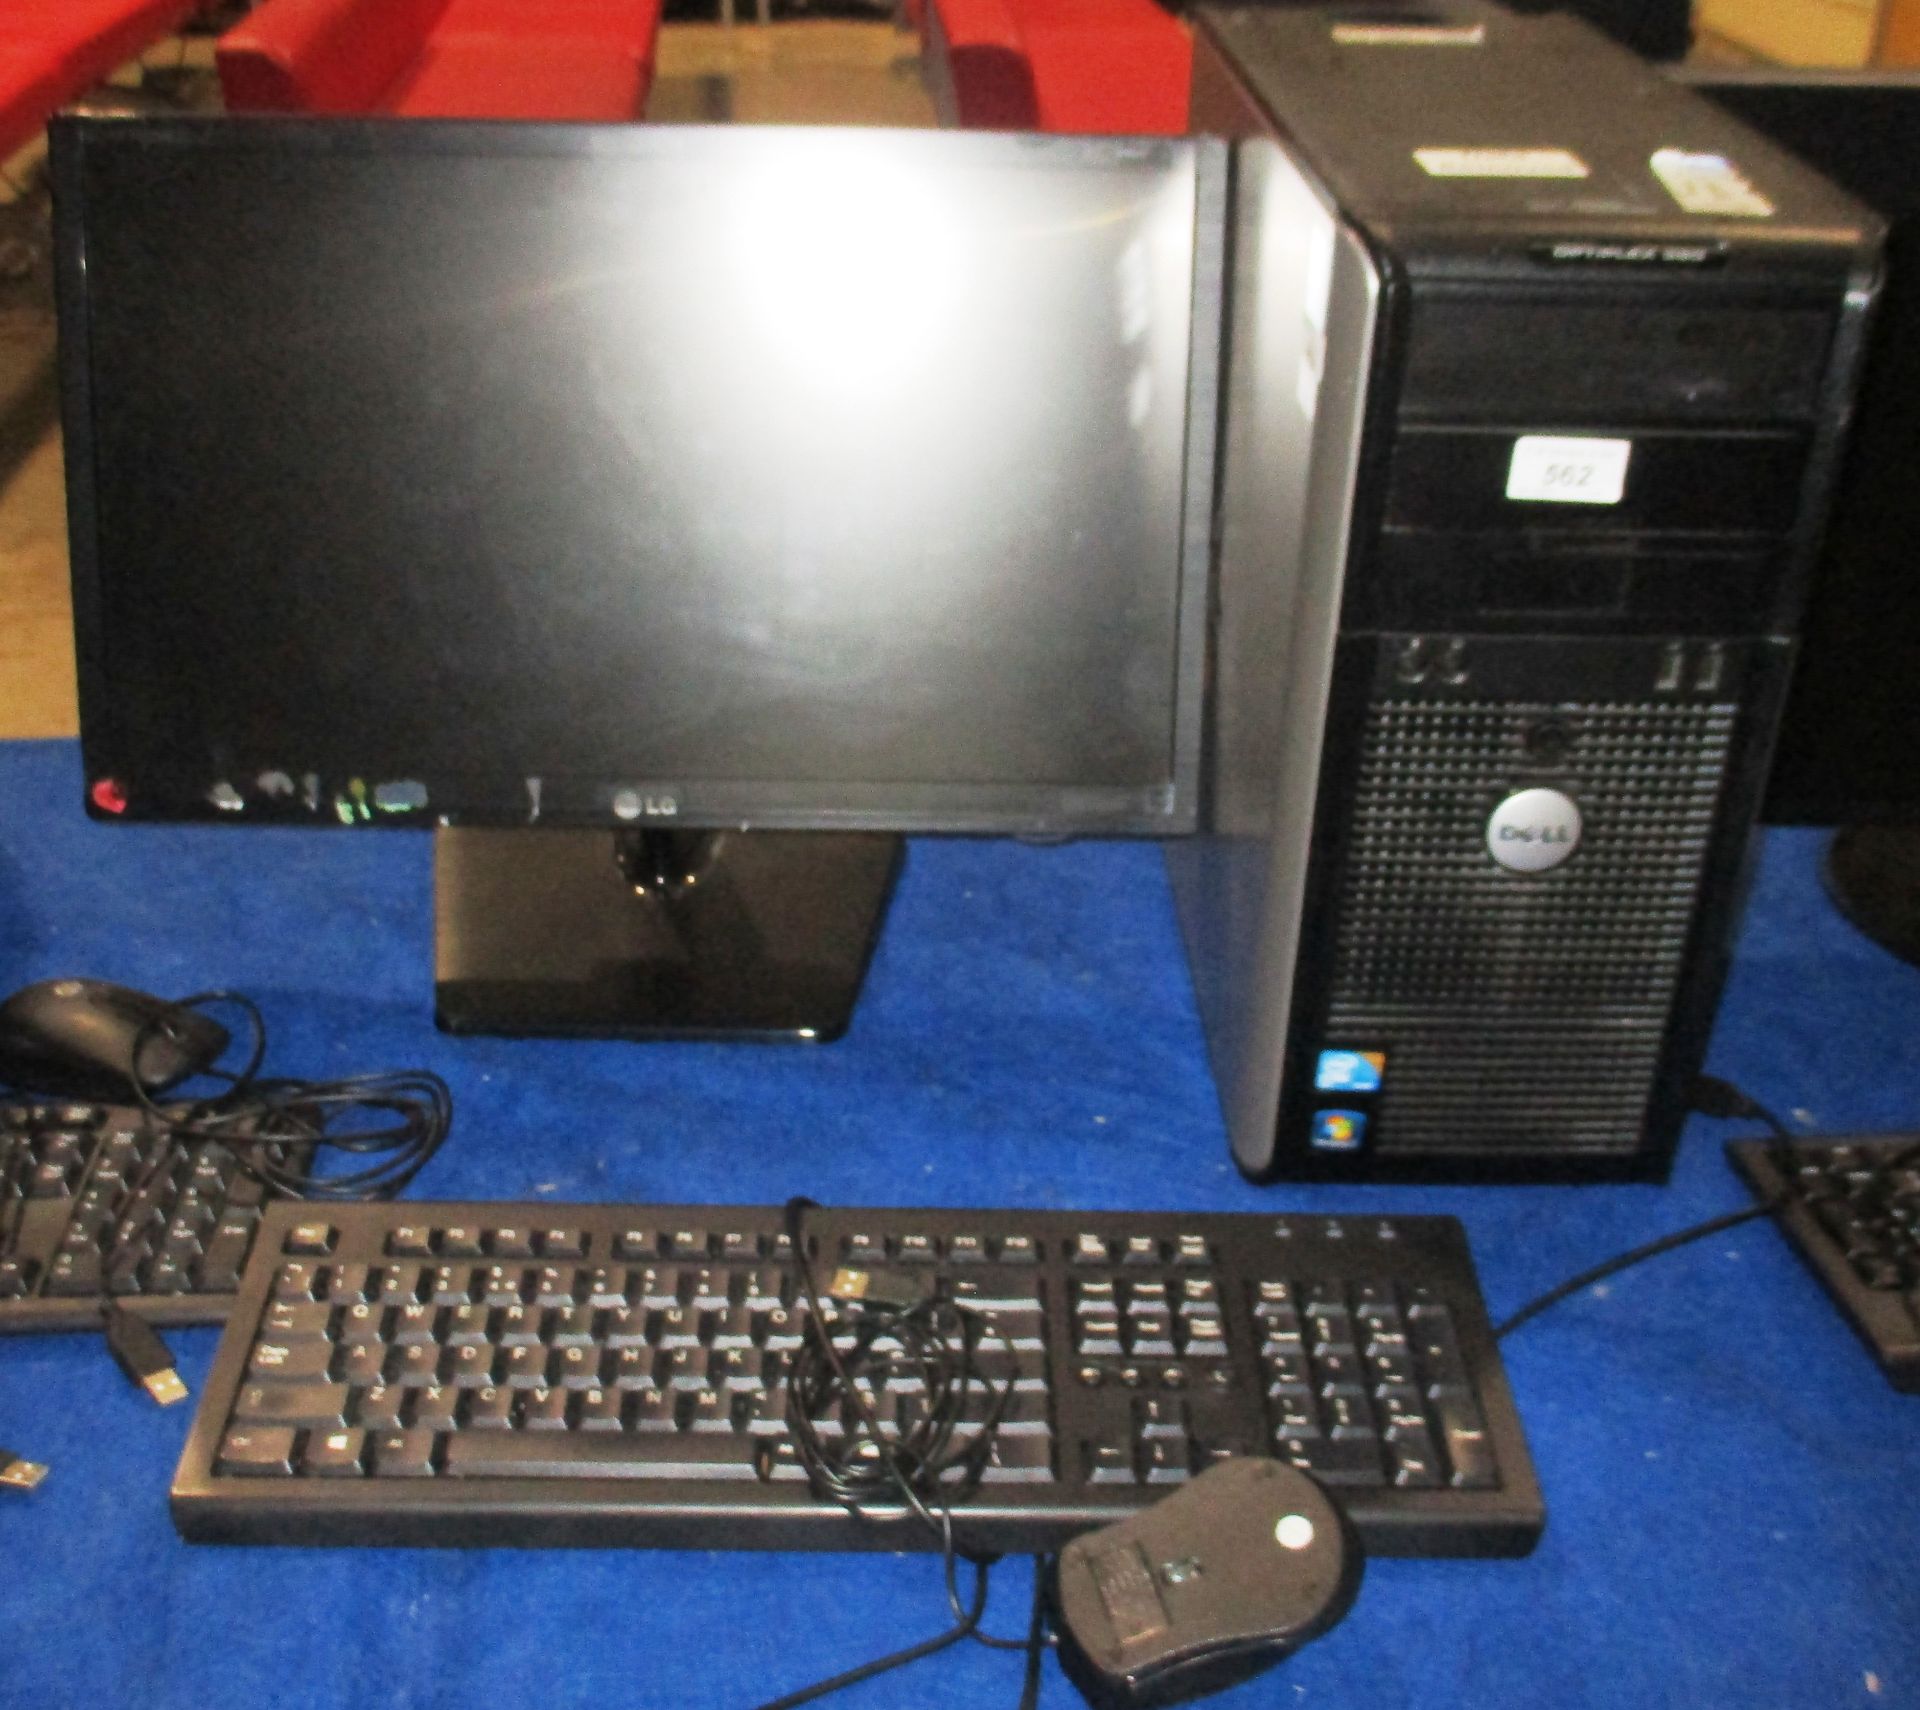 A HP Optiplex 380 tower computer - power lead complete with a LG 22" LCD monitor - power lead,